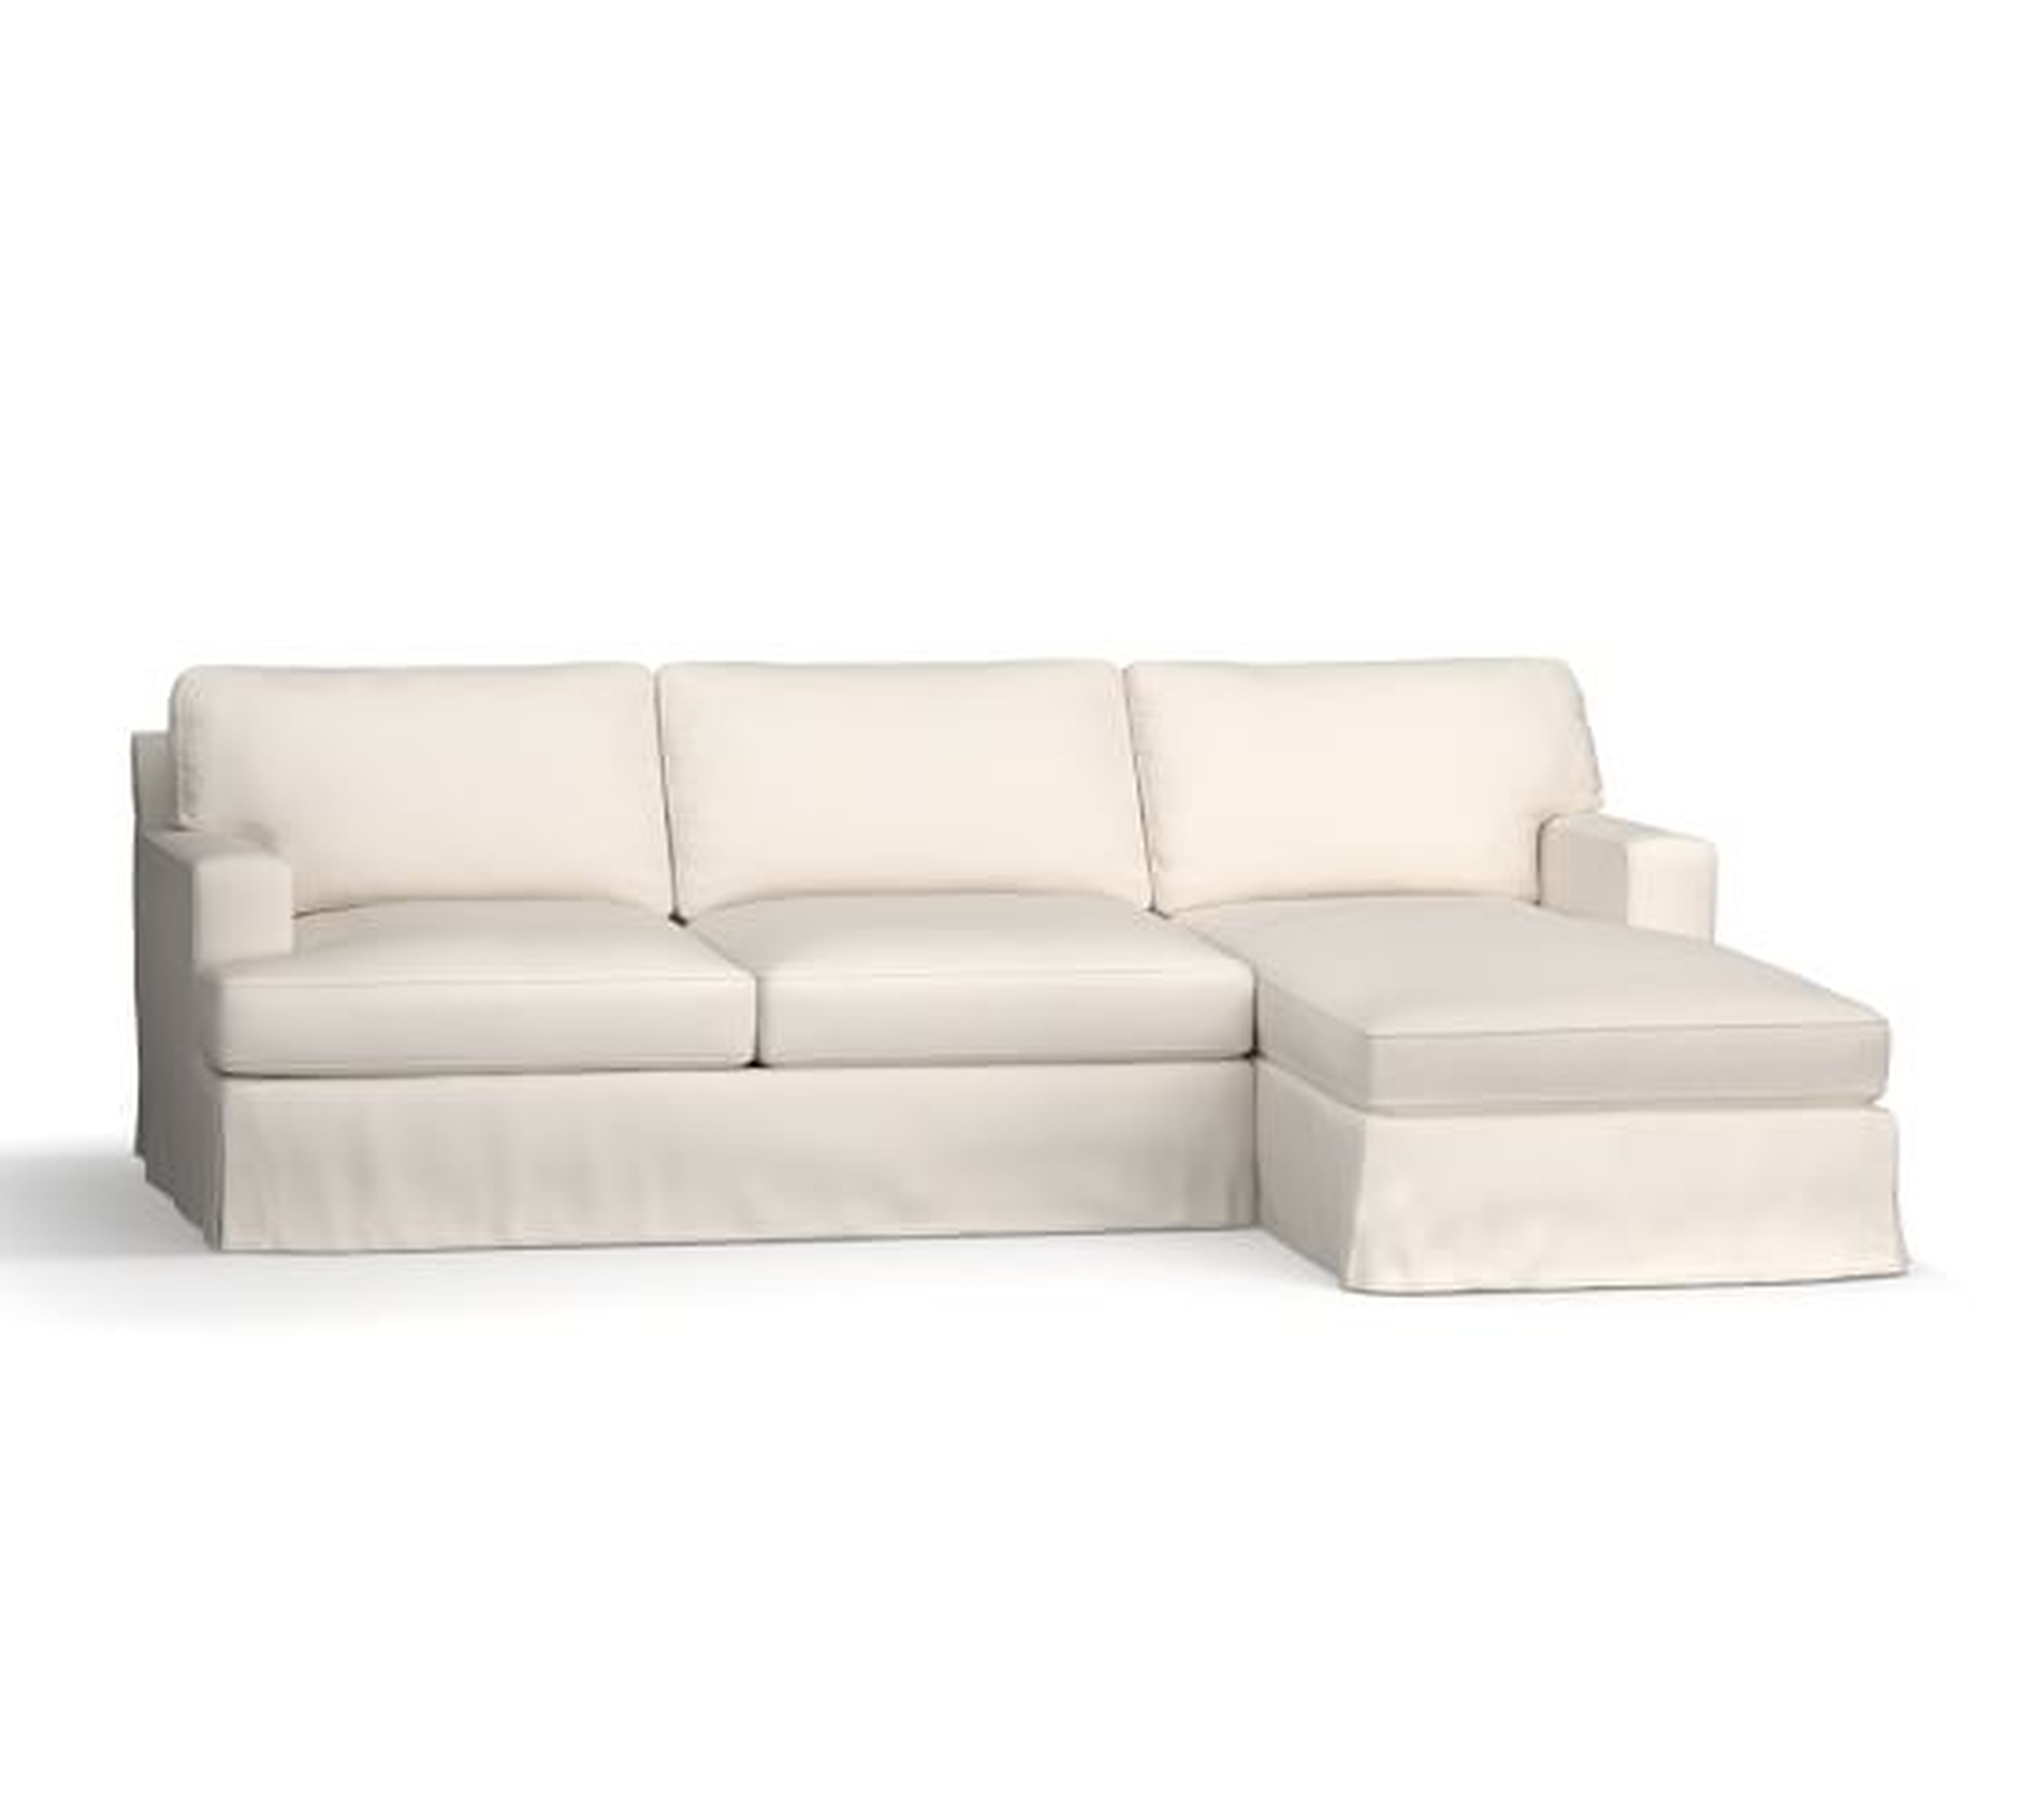 Townsend Square Arm Left Sofa with Chaise Sectional , Heathered Twill Stone - Pottery Barn